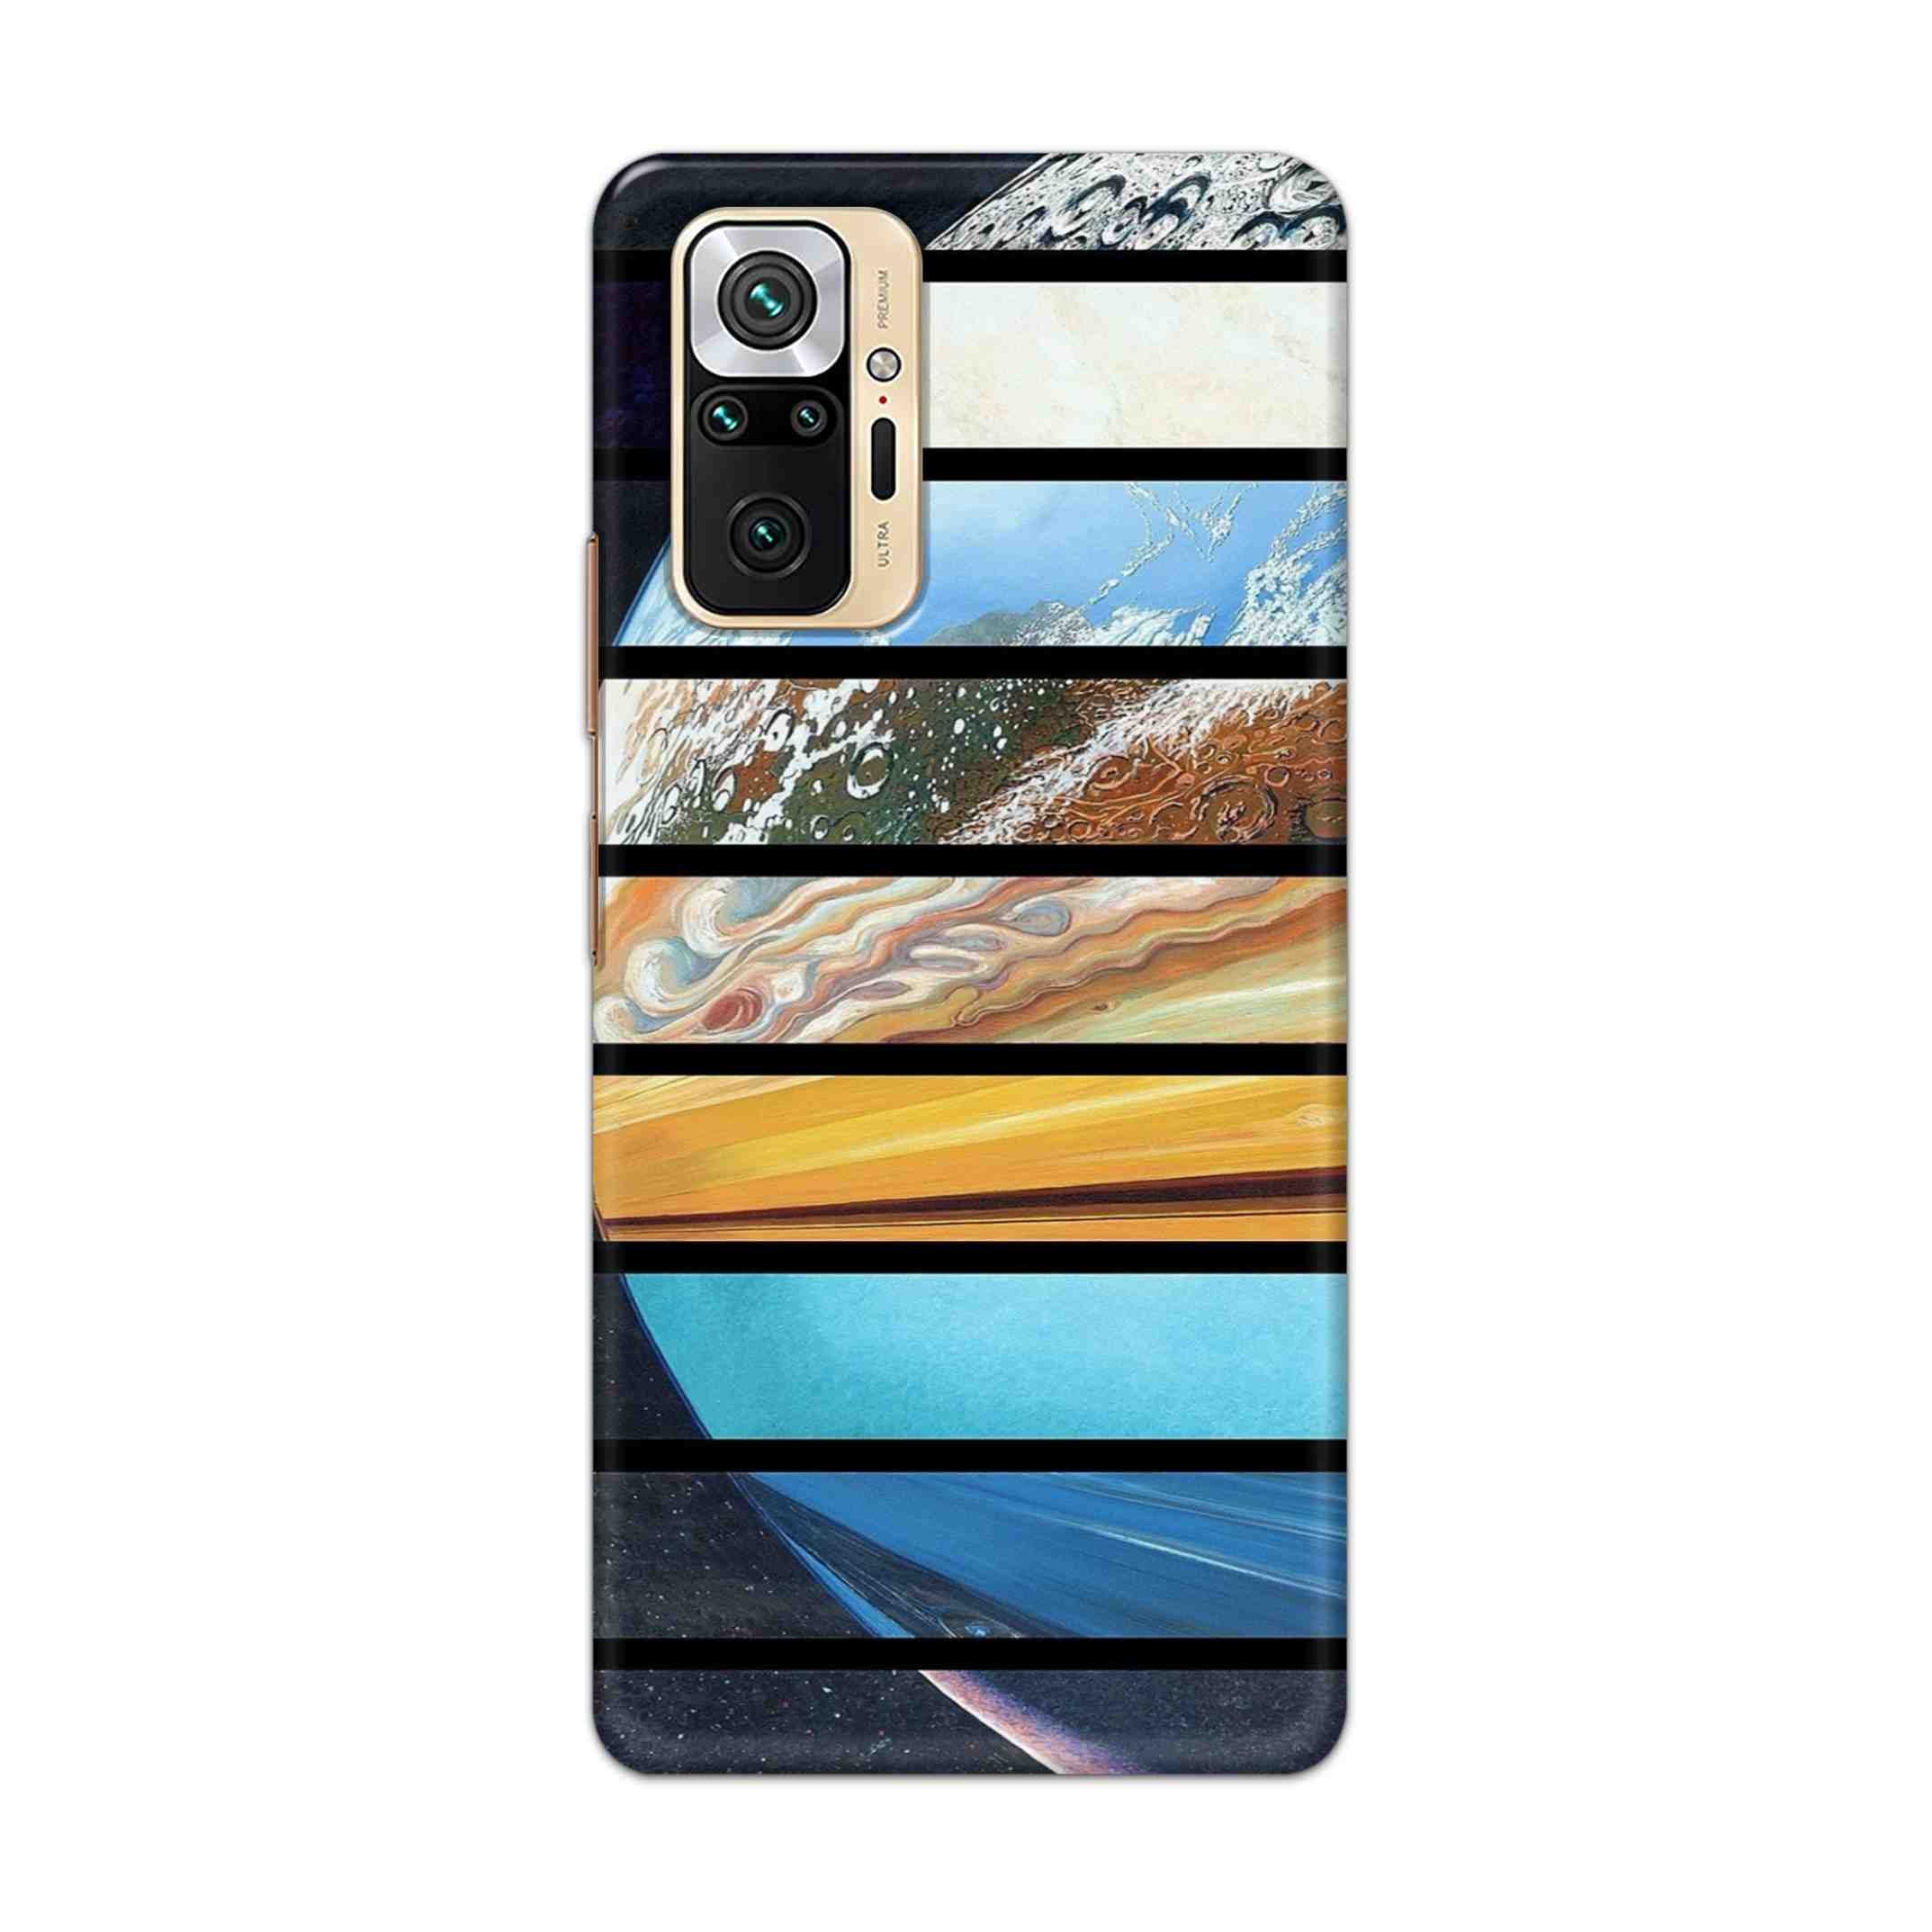 Buy Colourful Earth Hard Back Mobile Phone Case Cover For Redmi Note 10 Pro Max Online